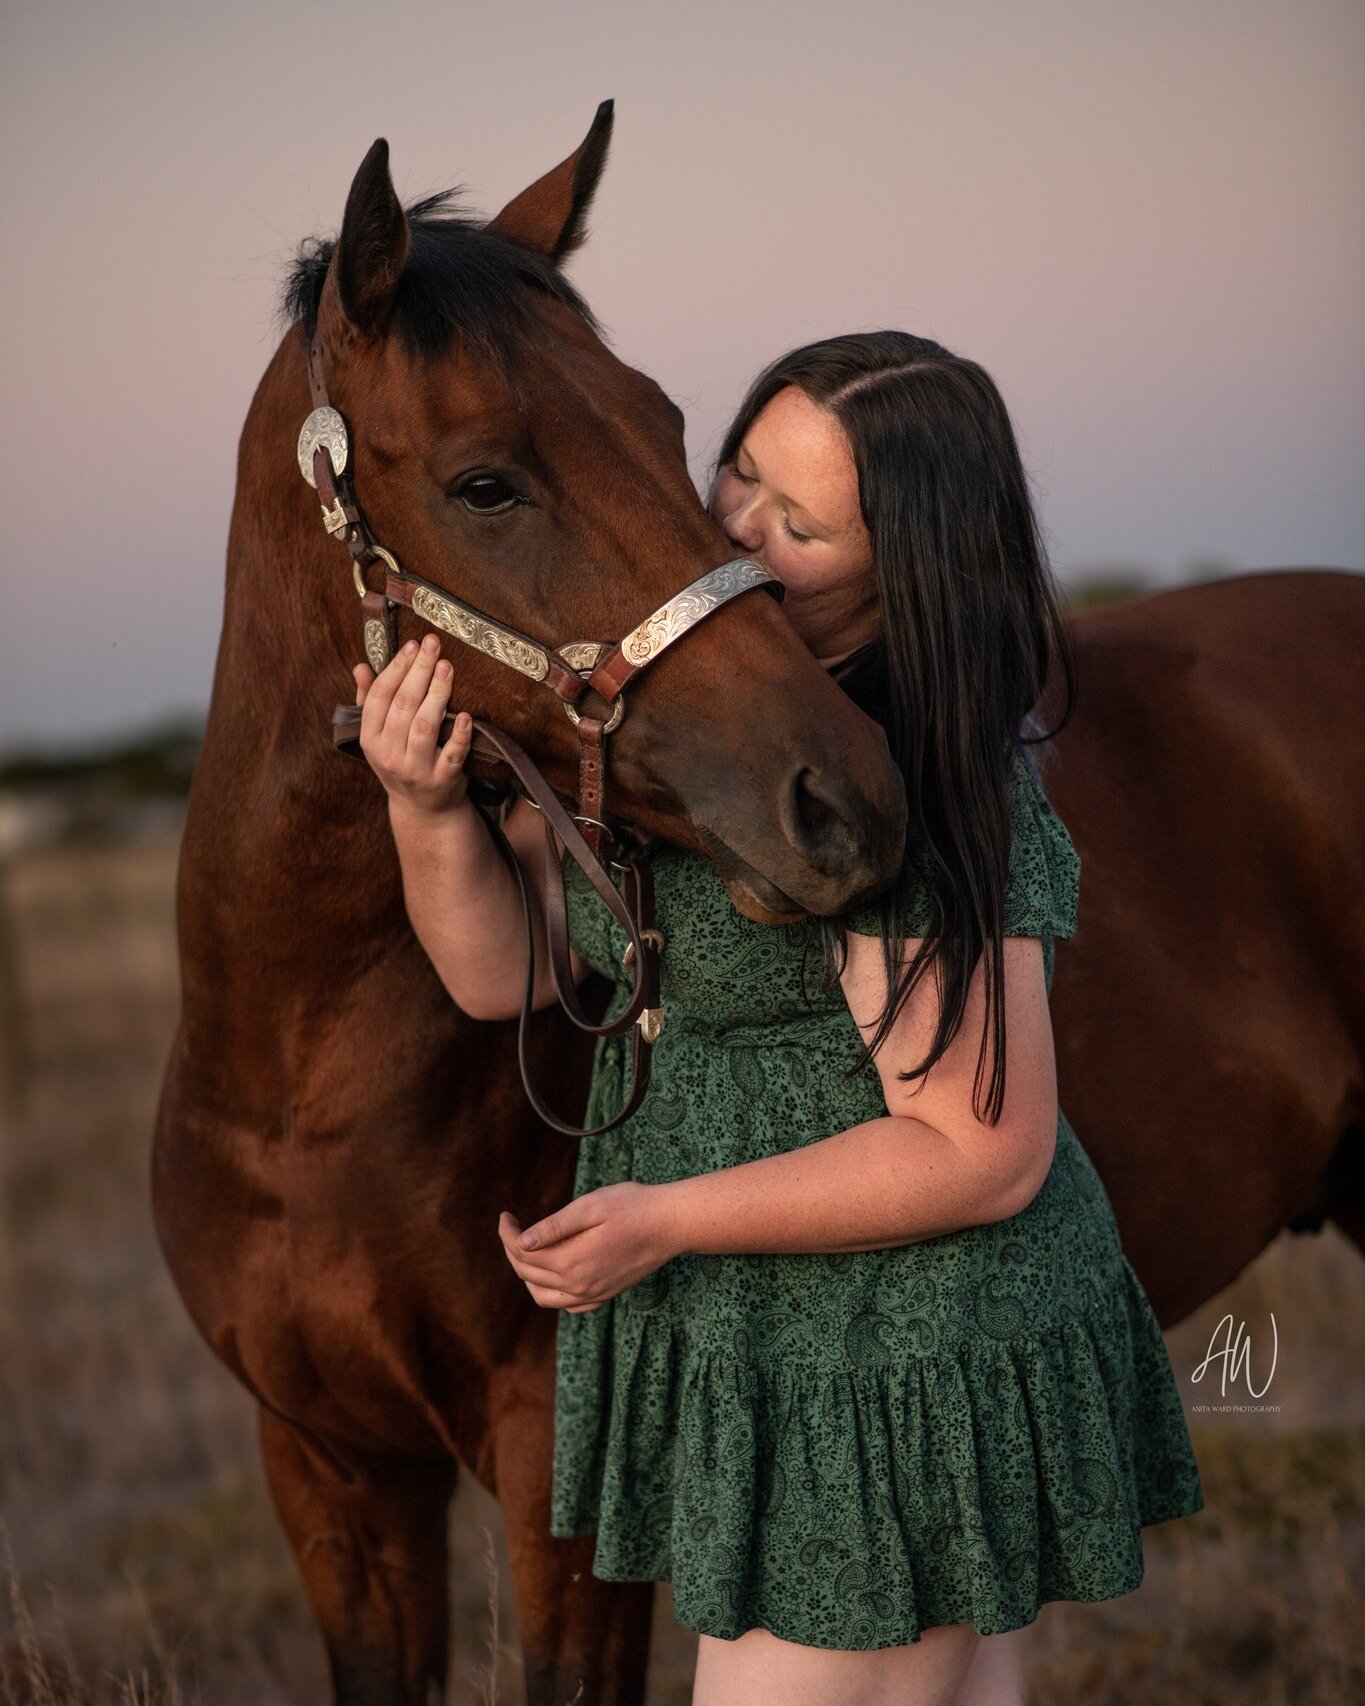 Hey friends, I'm so excited to share with you the amazing story of Jasmin and her two horses, Cowboy and Rebel! I recently had the privilege of capturing their special bond in a photo session, and it was such an incredible experience. Jasmin's love a